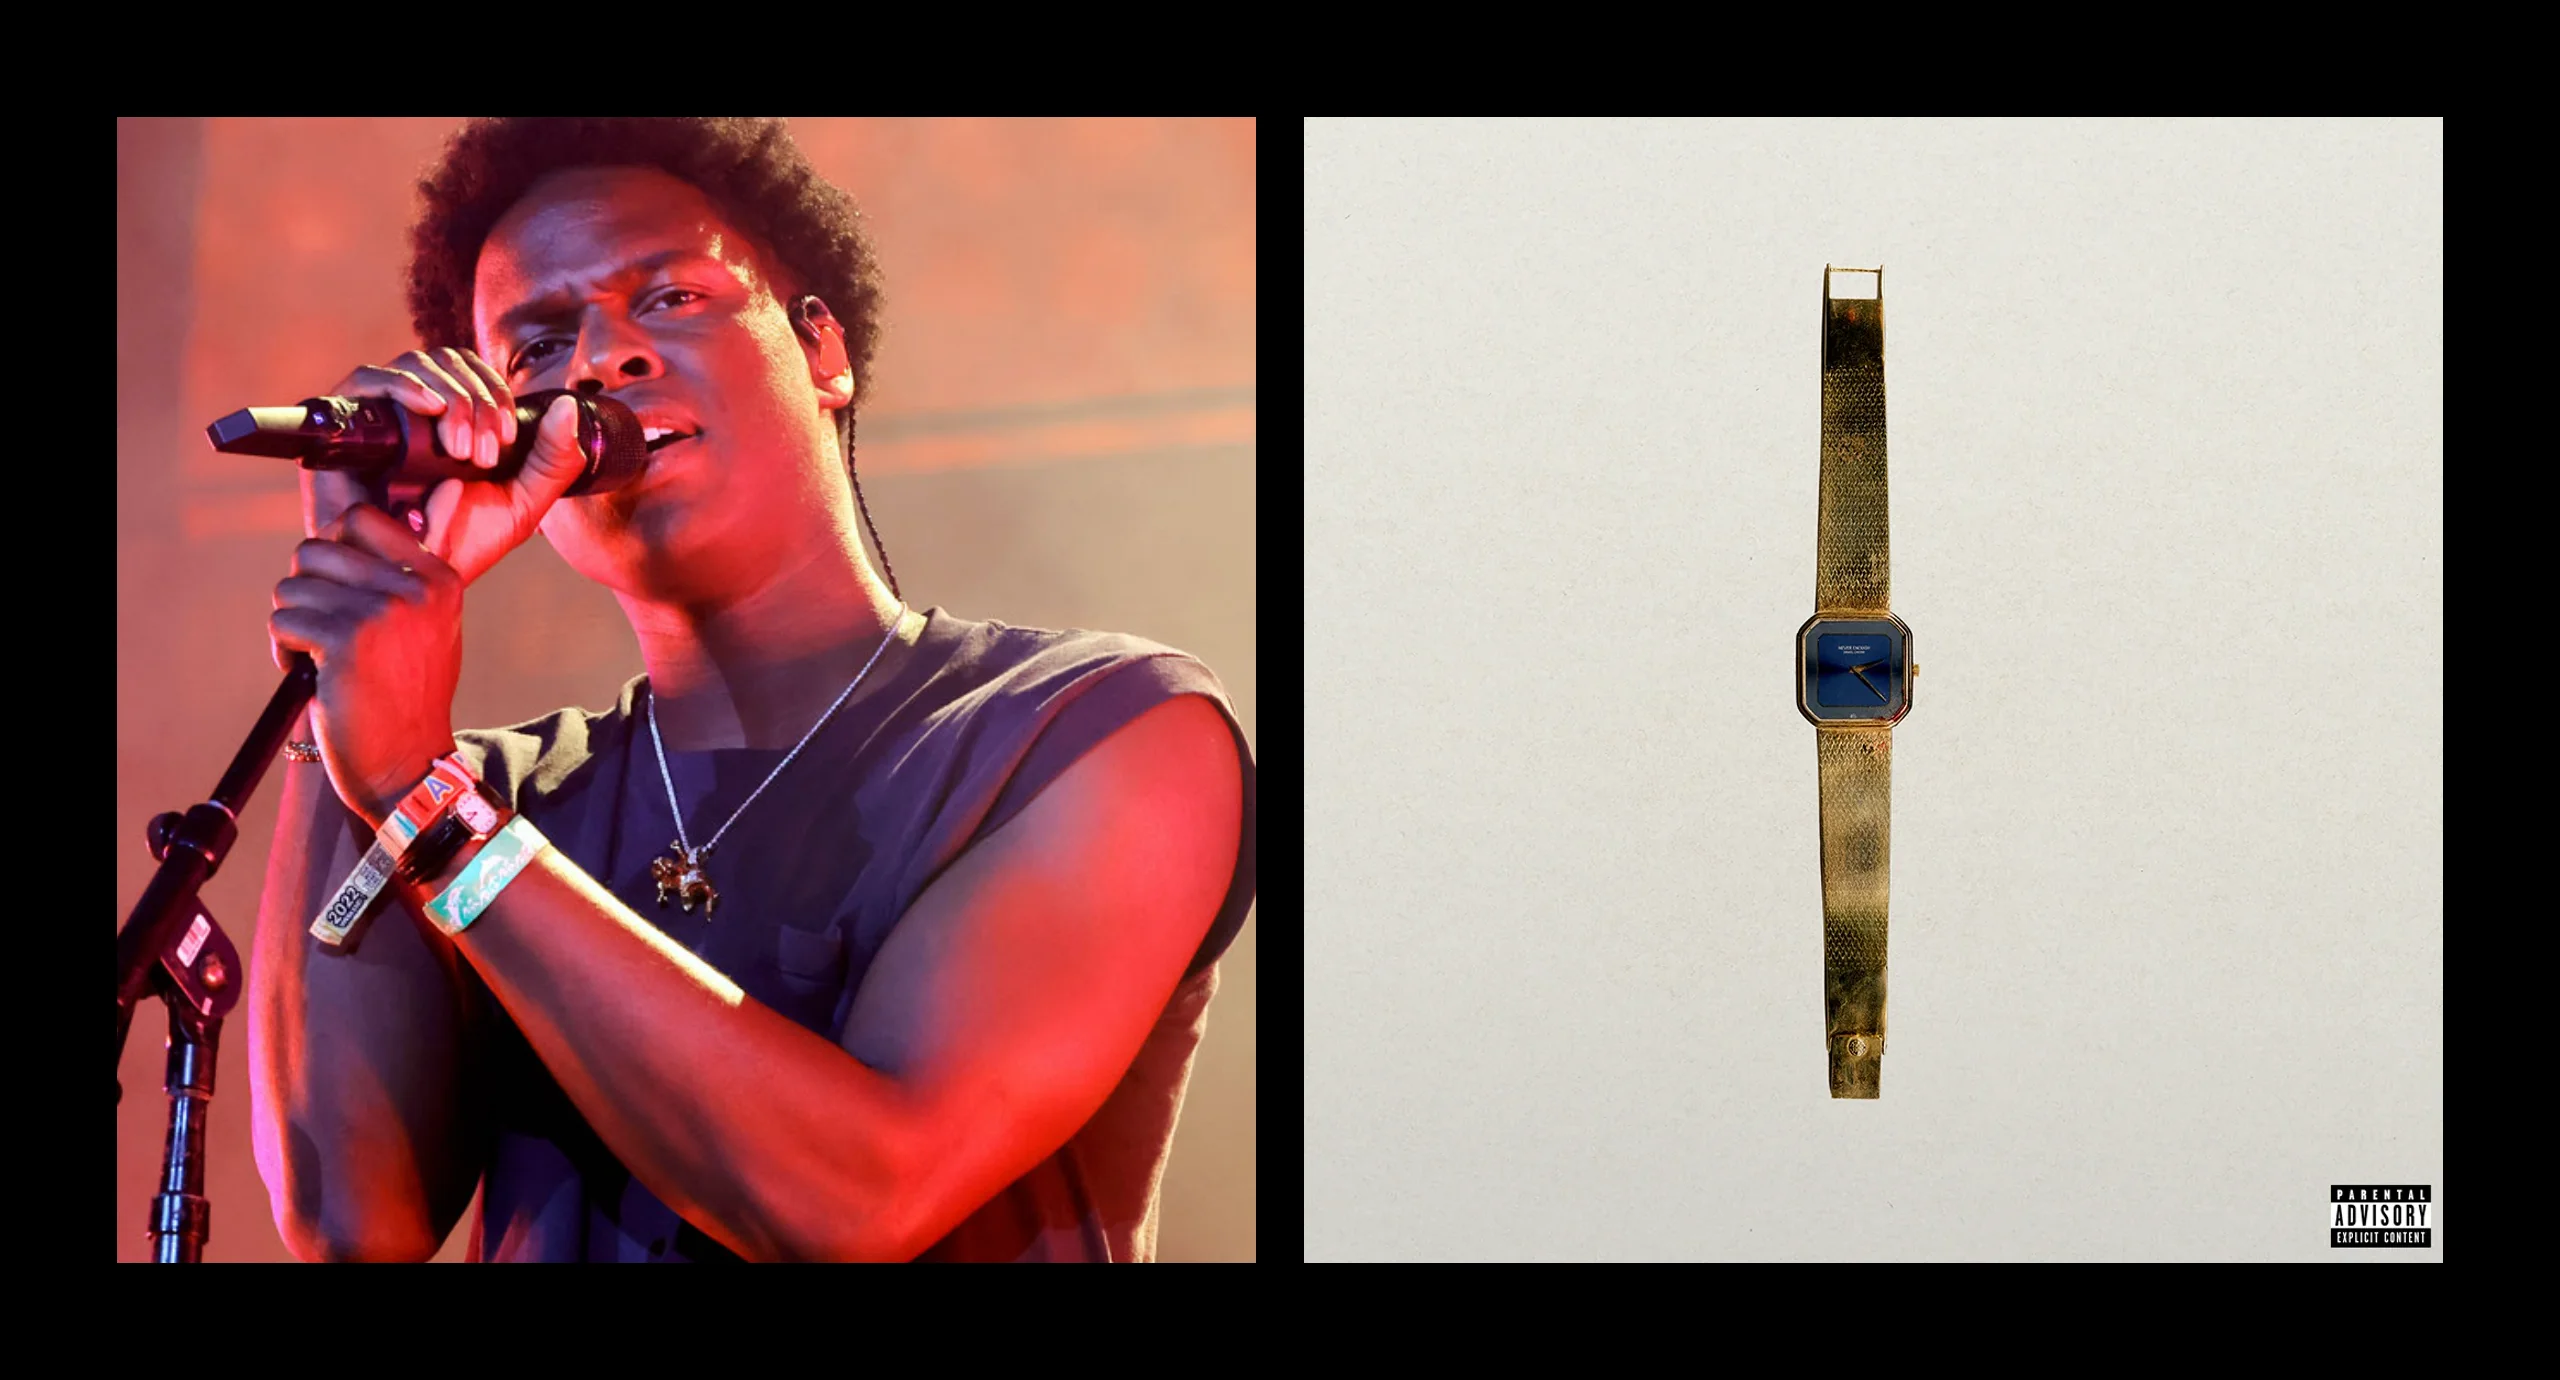 R&B singer Daniel Caesar is a serious watch geek and his Patek Philippe album cover is the stone-cold proof